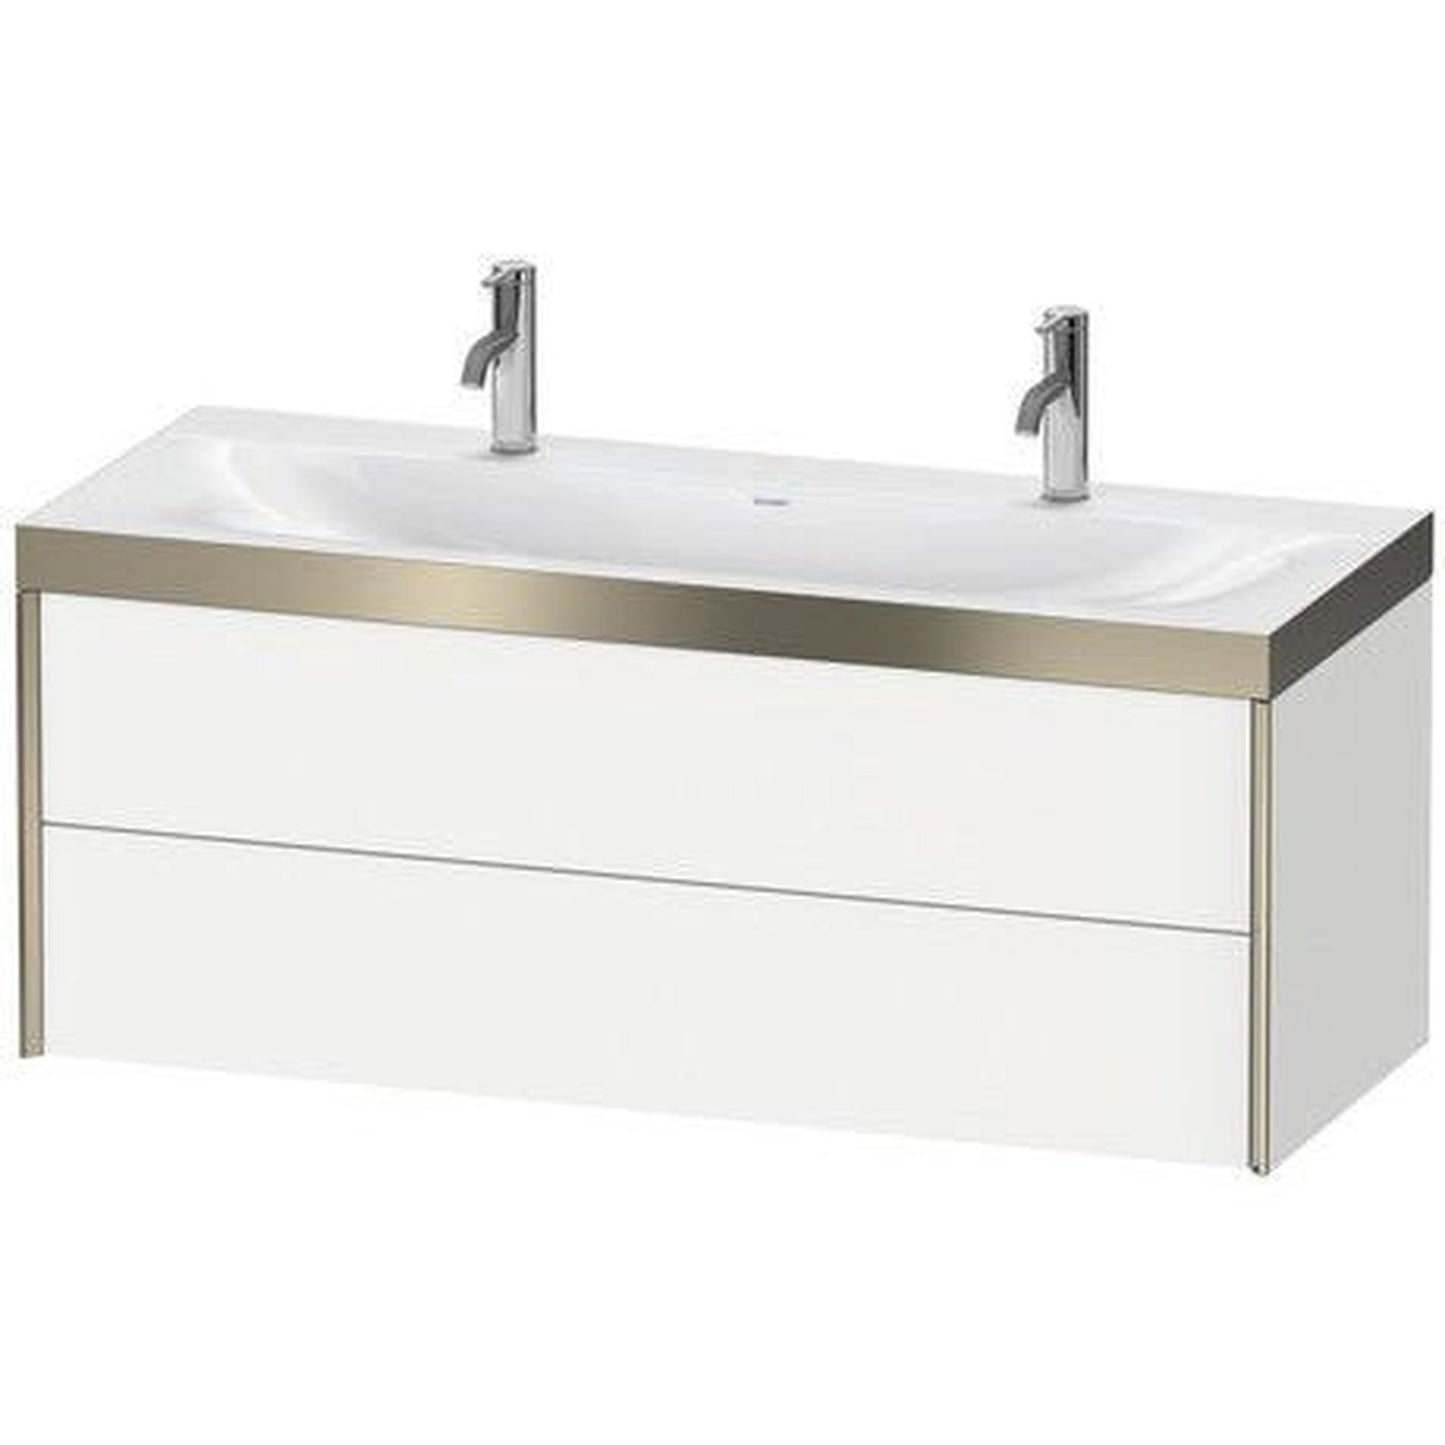 Duravit Xviu 47" x 20" x 19" Two Drawer C-Bonded Wall-Mount Vanity Kit With One Tap Hole, Concrete Gray (XV4618OB207P)